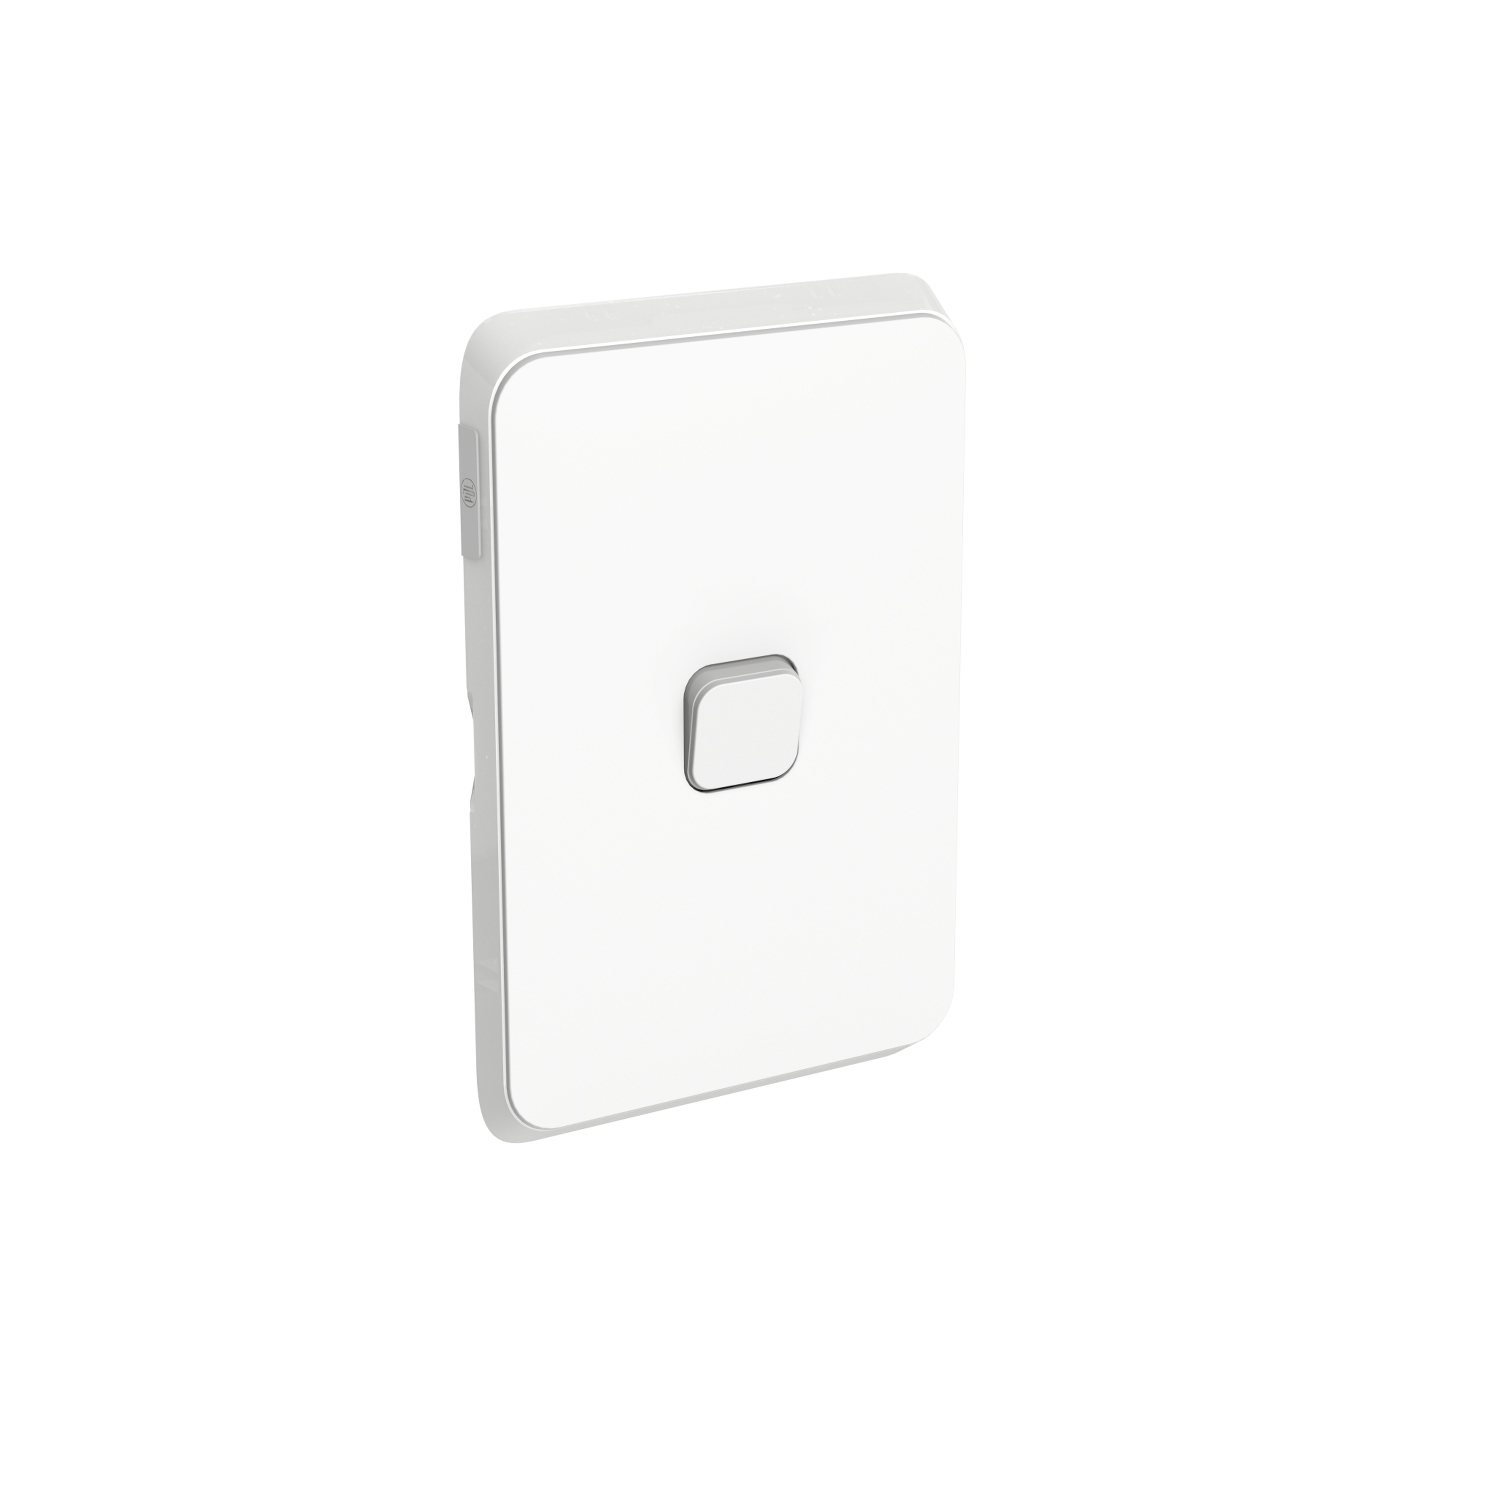 PDL Iconic - Cover Plate Switch 1-Gang - Vivid White